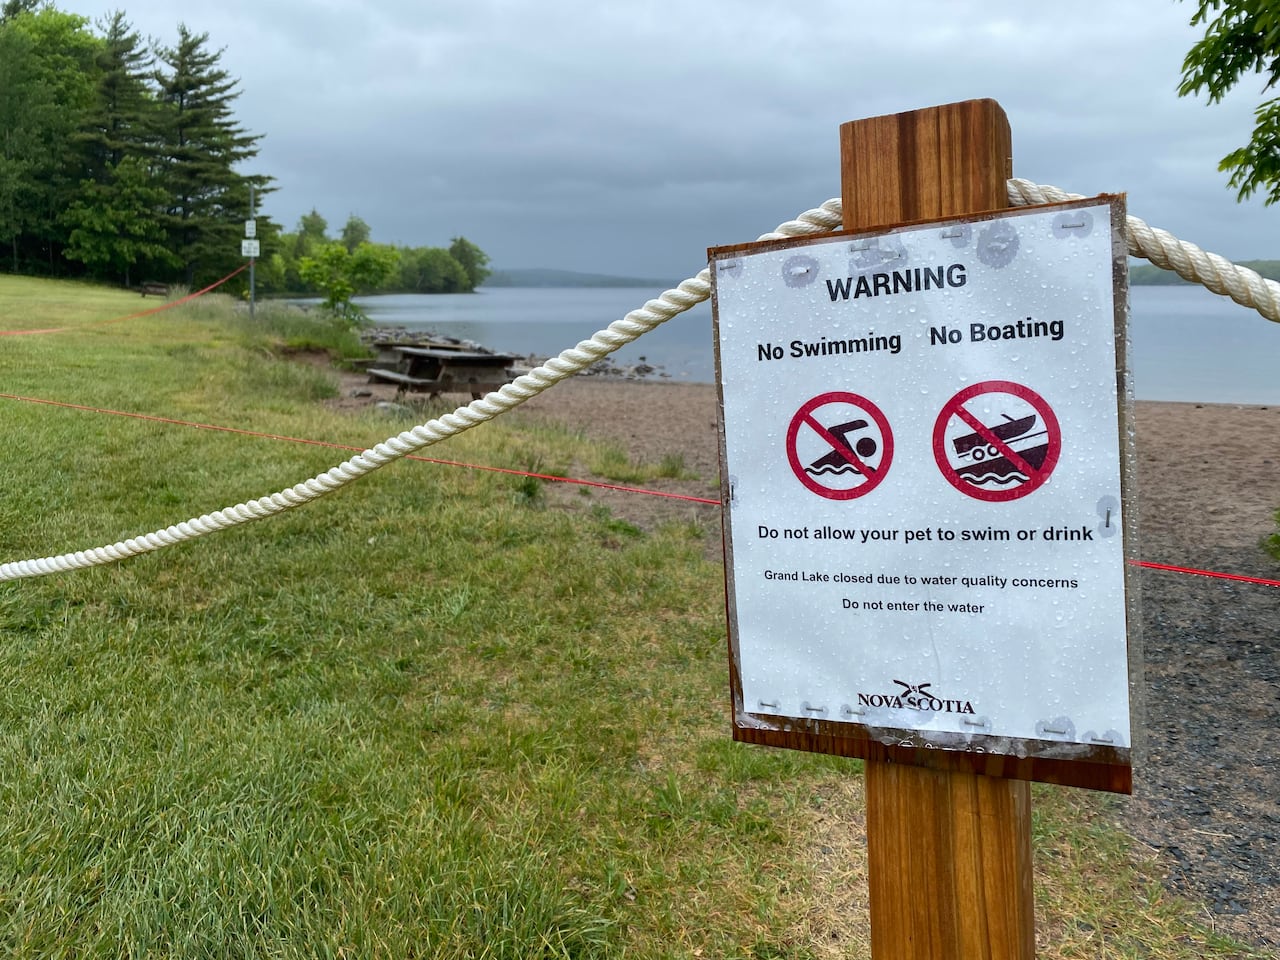 new study examines origins of toxic bacteria that killed 2 dogs at halifax-area lake